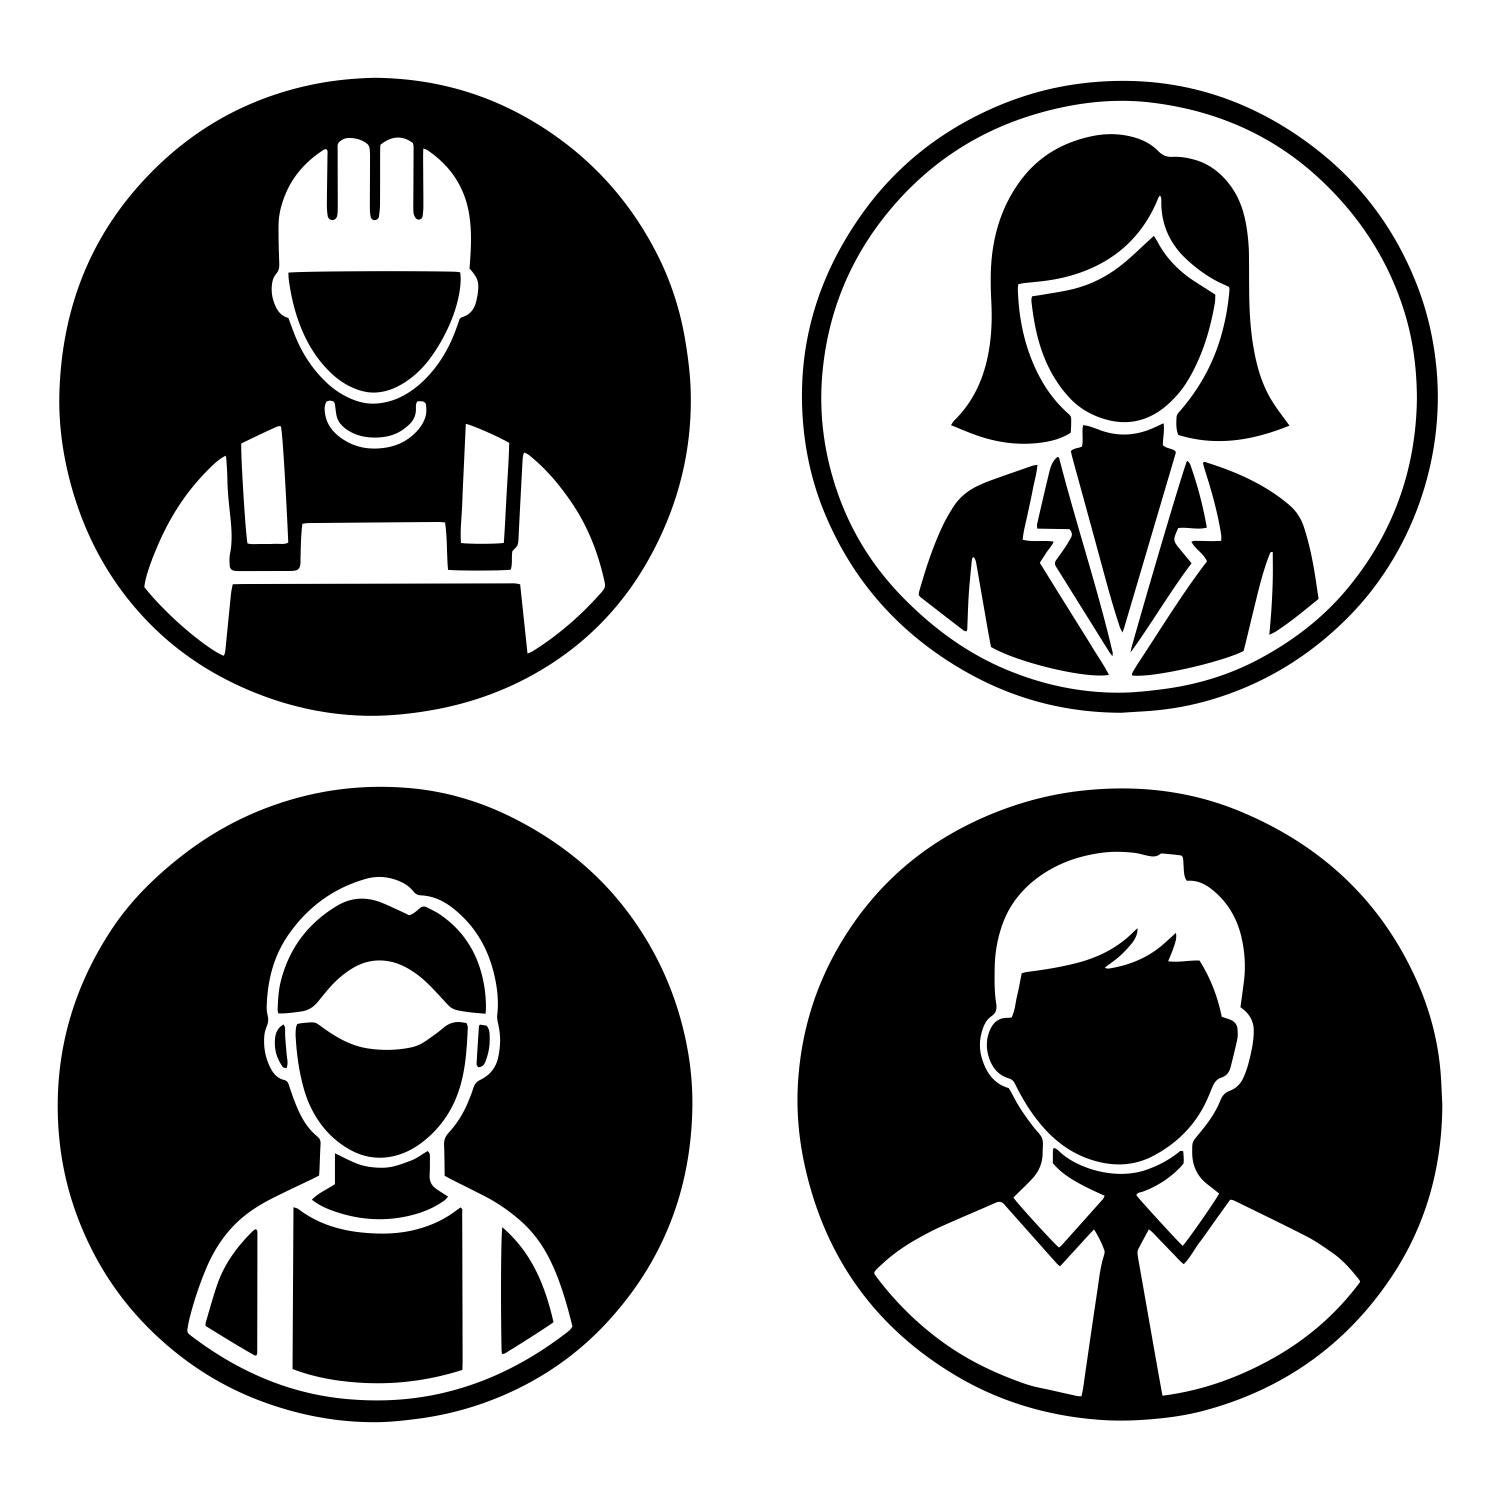 Free vector set of worker icon illustration isolated in white background CDR file download free